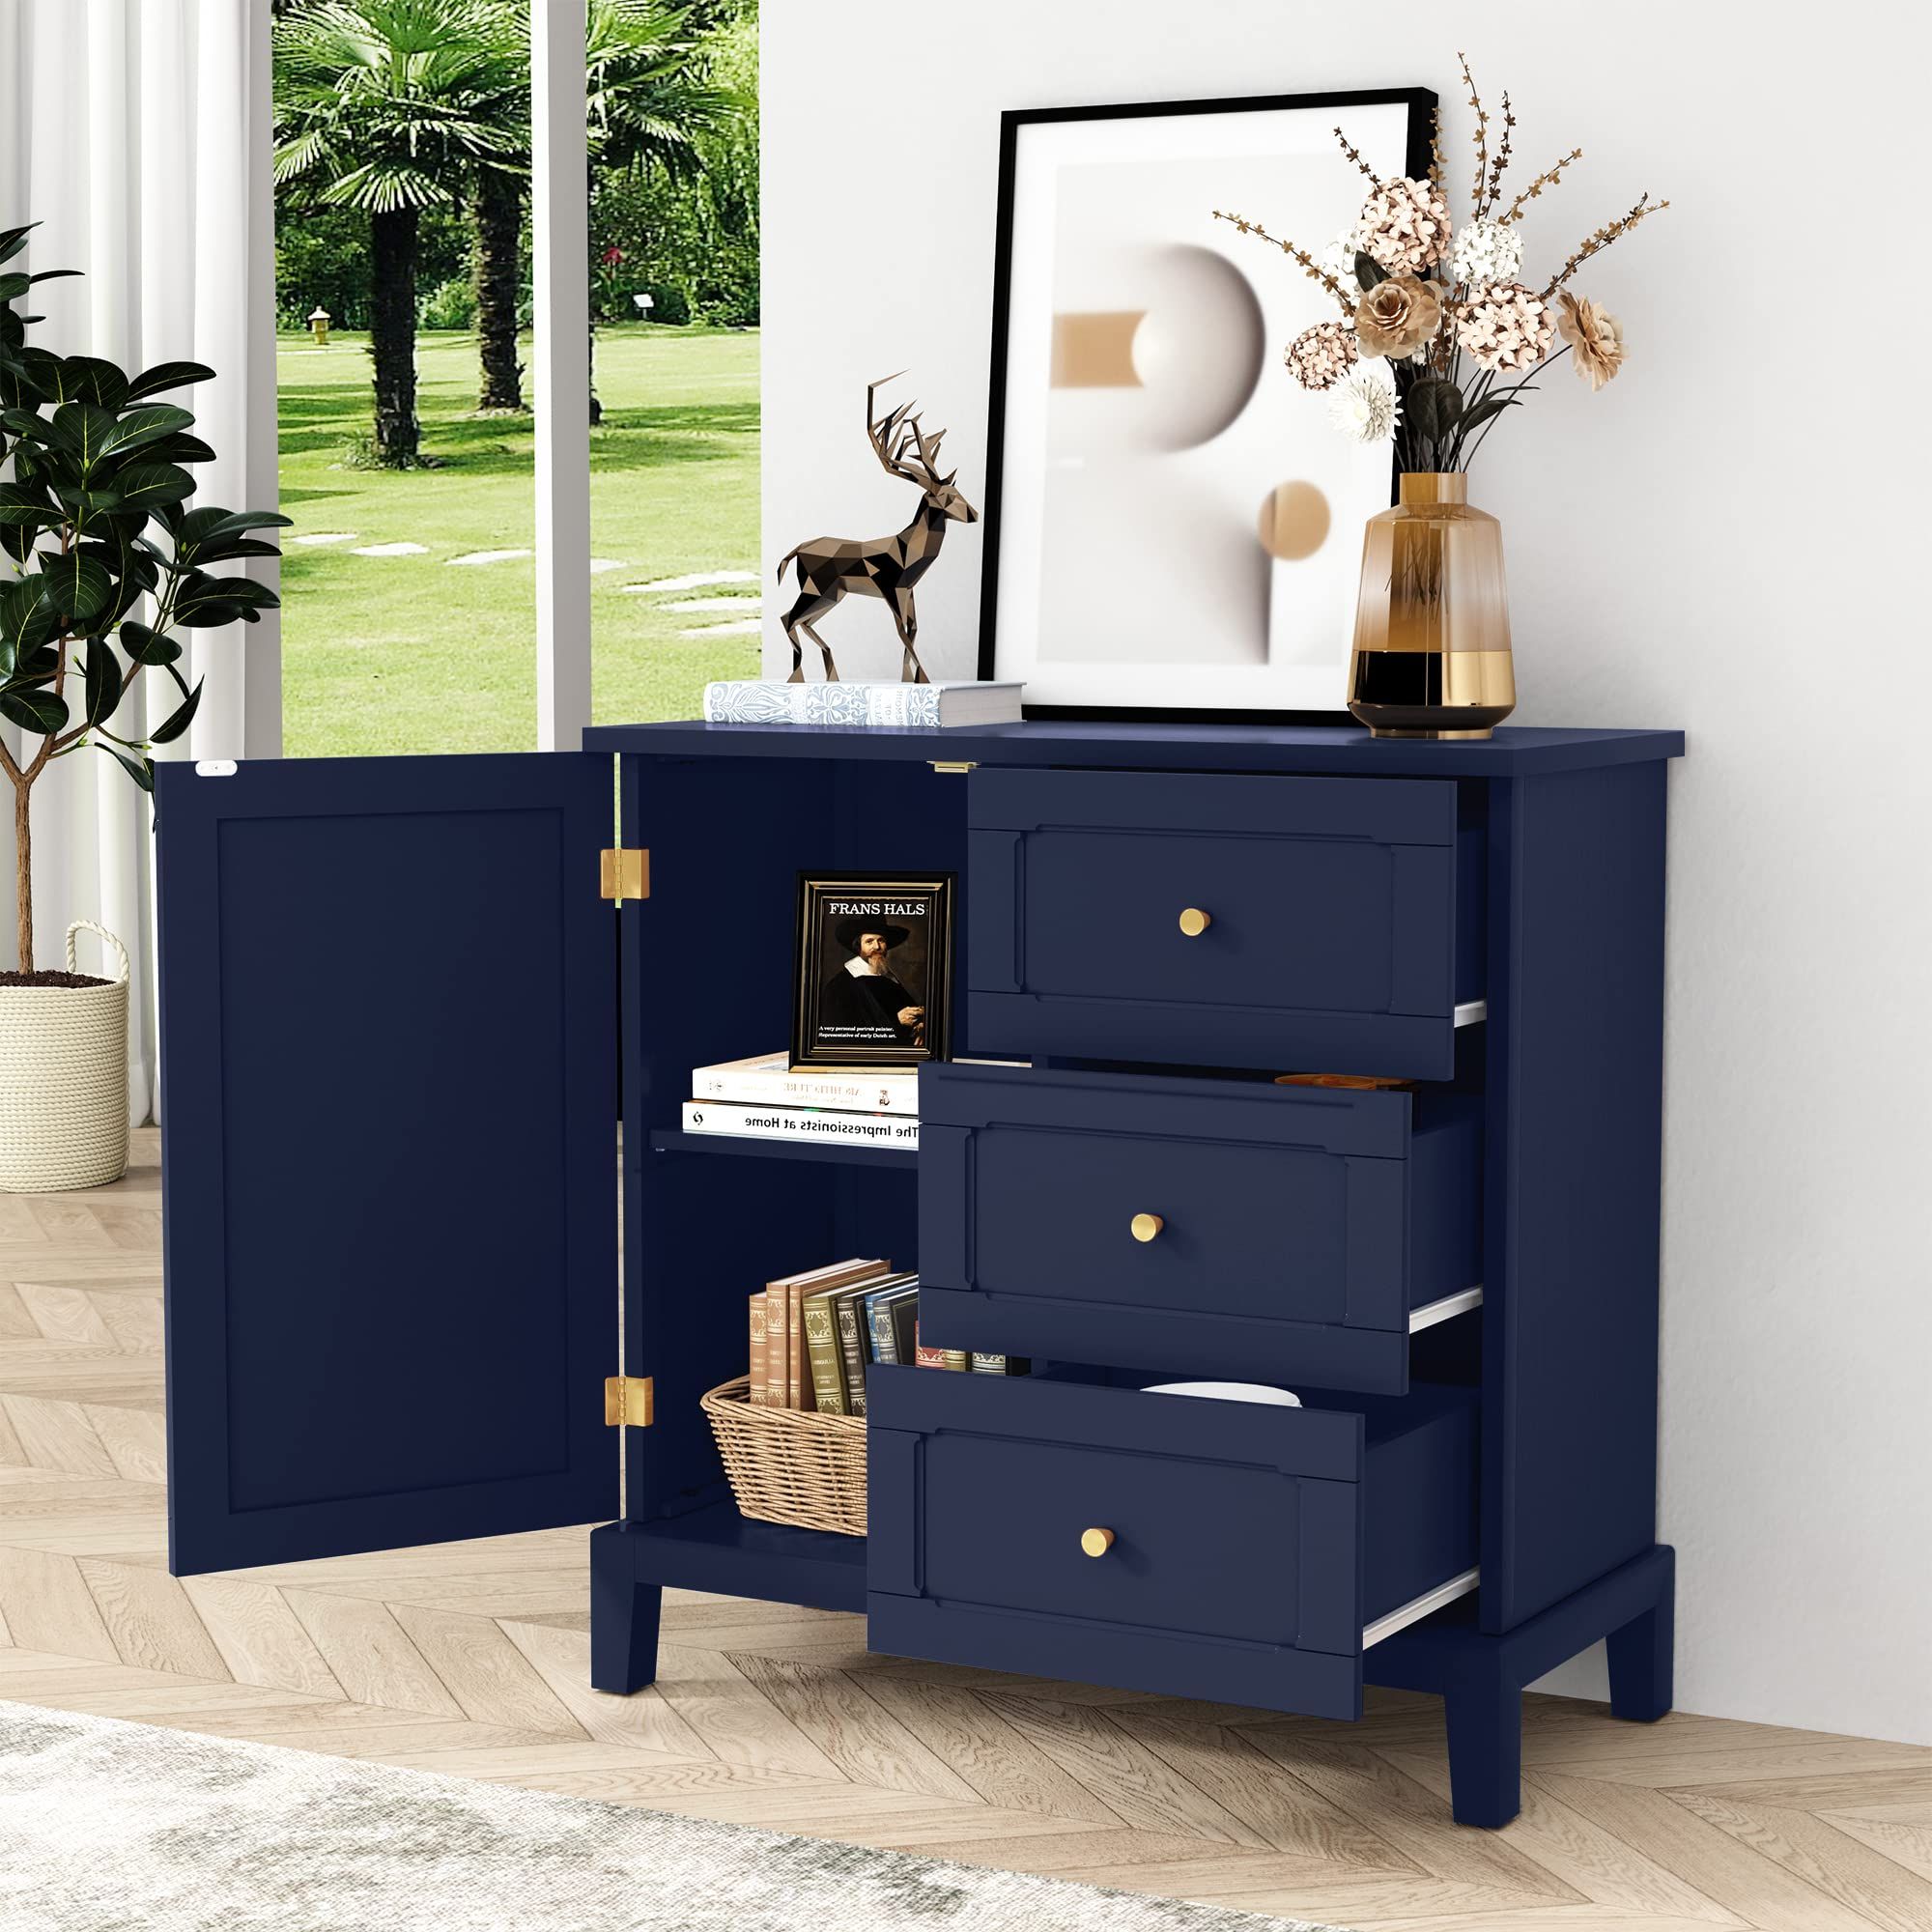 Newest Amazon: Hlr Accent Cabinet With 3 Drawers And Door, Wooden Storage  Cabinet With Shelves, Sideboard For Living Room, Bedroom, Entryway, Navy  Blue : Home & Kitchen With Regard To 3 Drawers Sideboards Storage Cabinet (View 8 of 10)